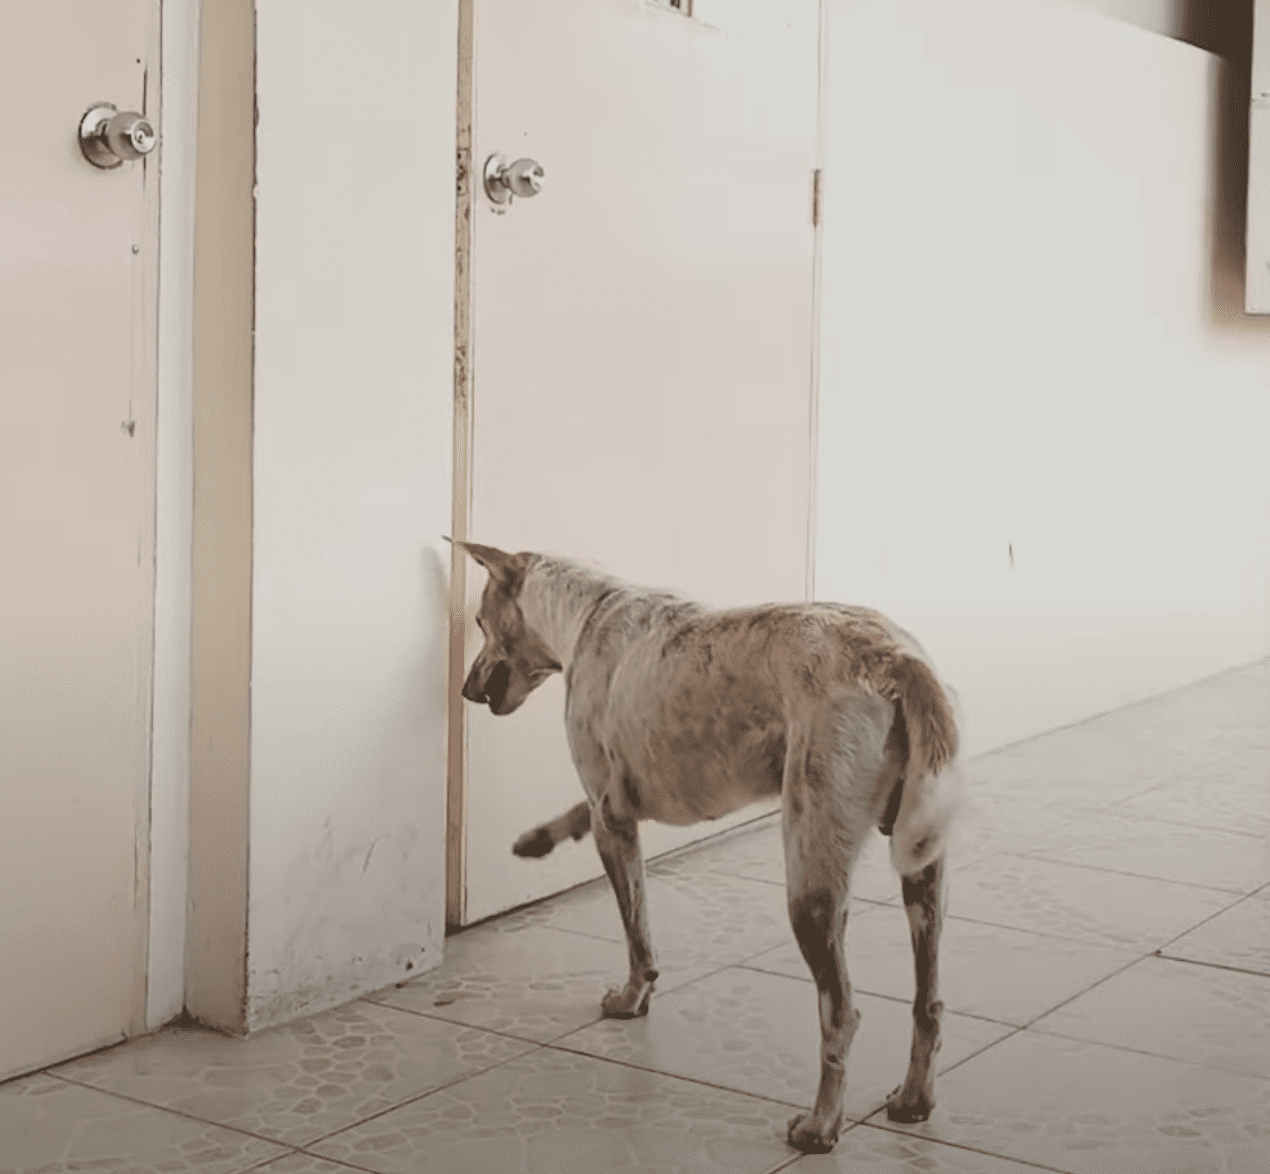 Dog waits for his human friend unaware that he has passed away | Source: Youtube/Viral Press